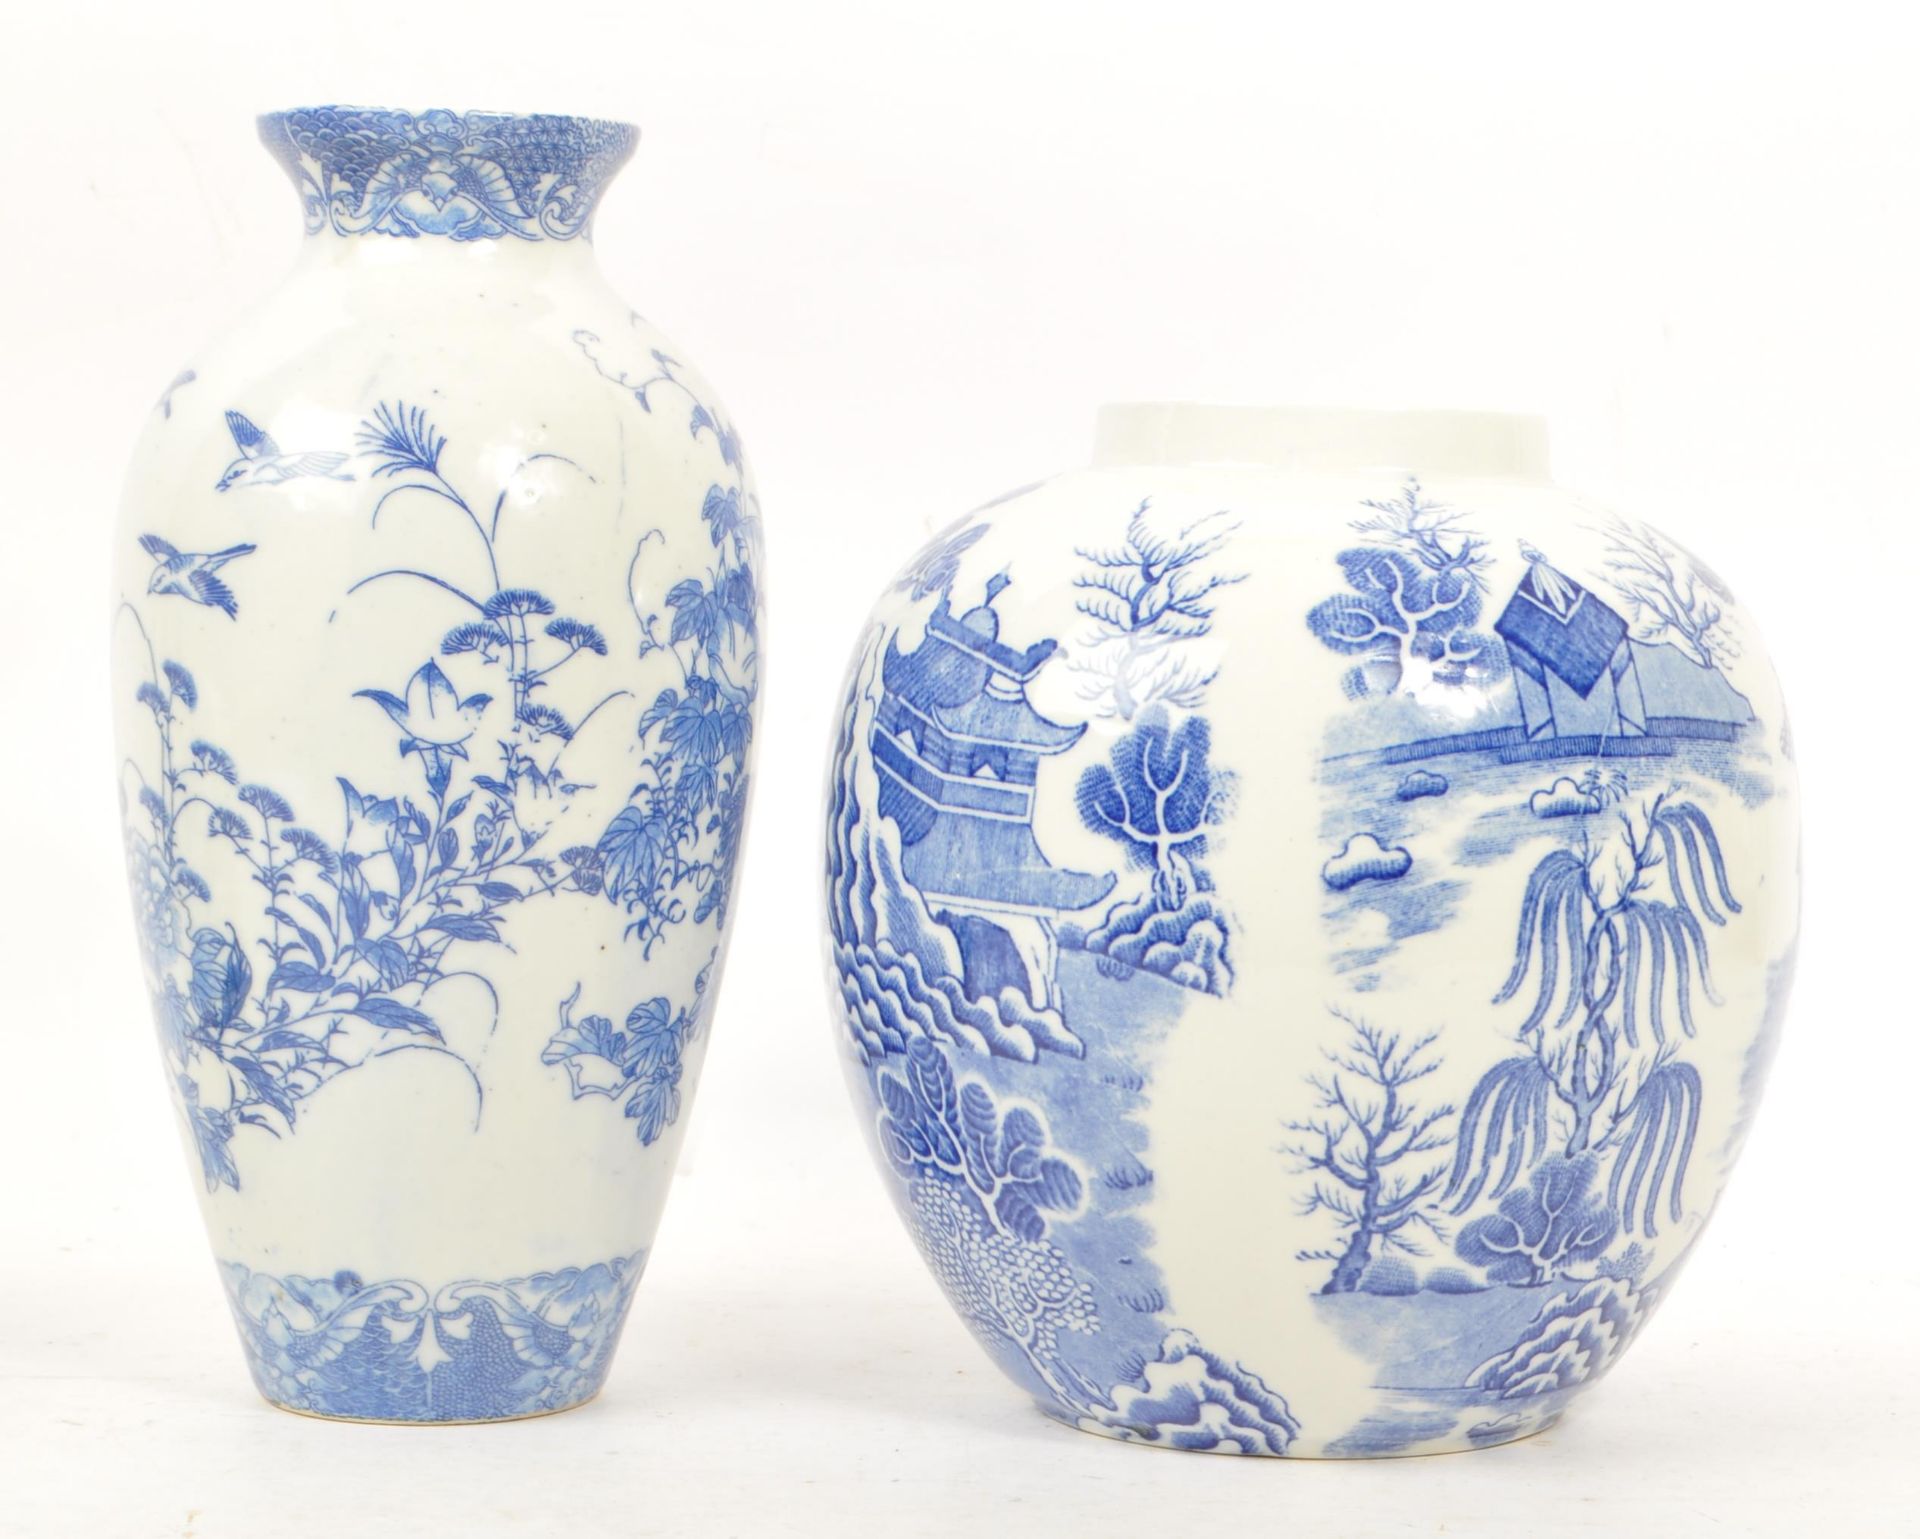 MASON'S - COLLECTION OF BRITISH AND CHINESE PORCELAIN ITEMS - Image 7 of 10